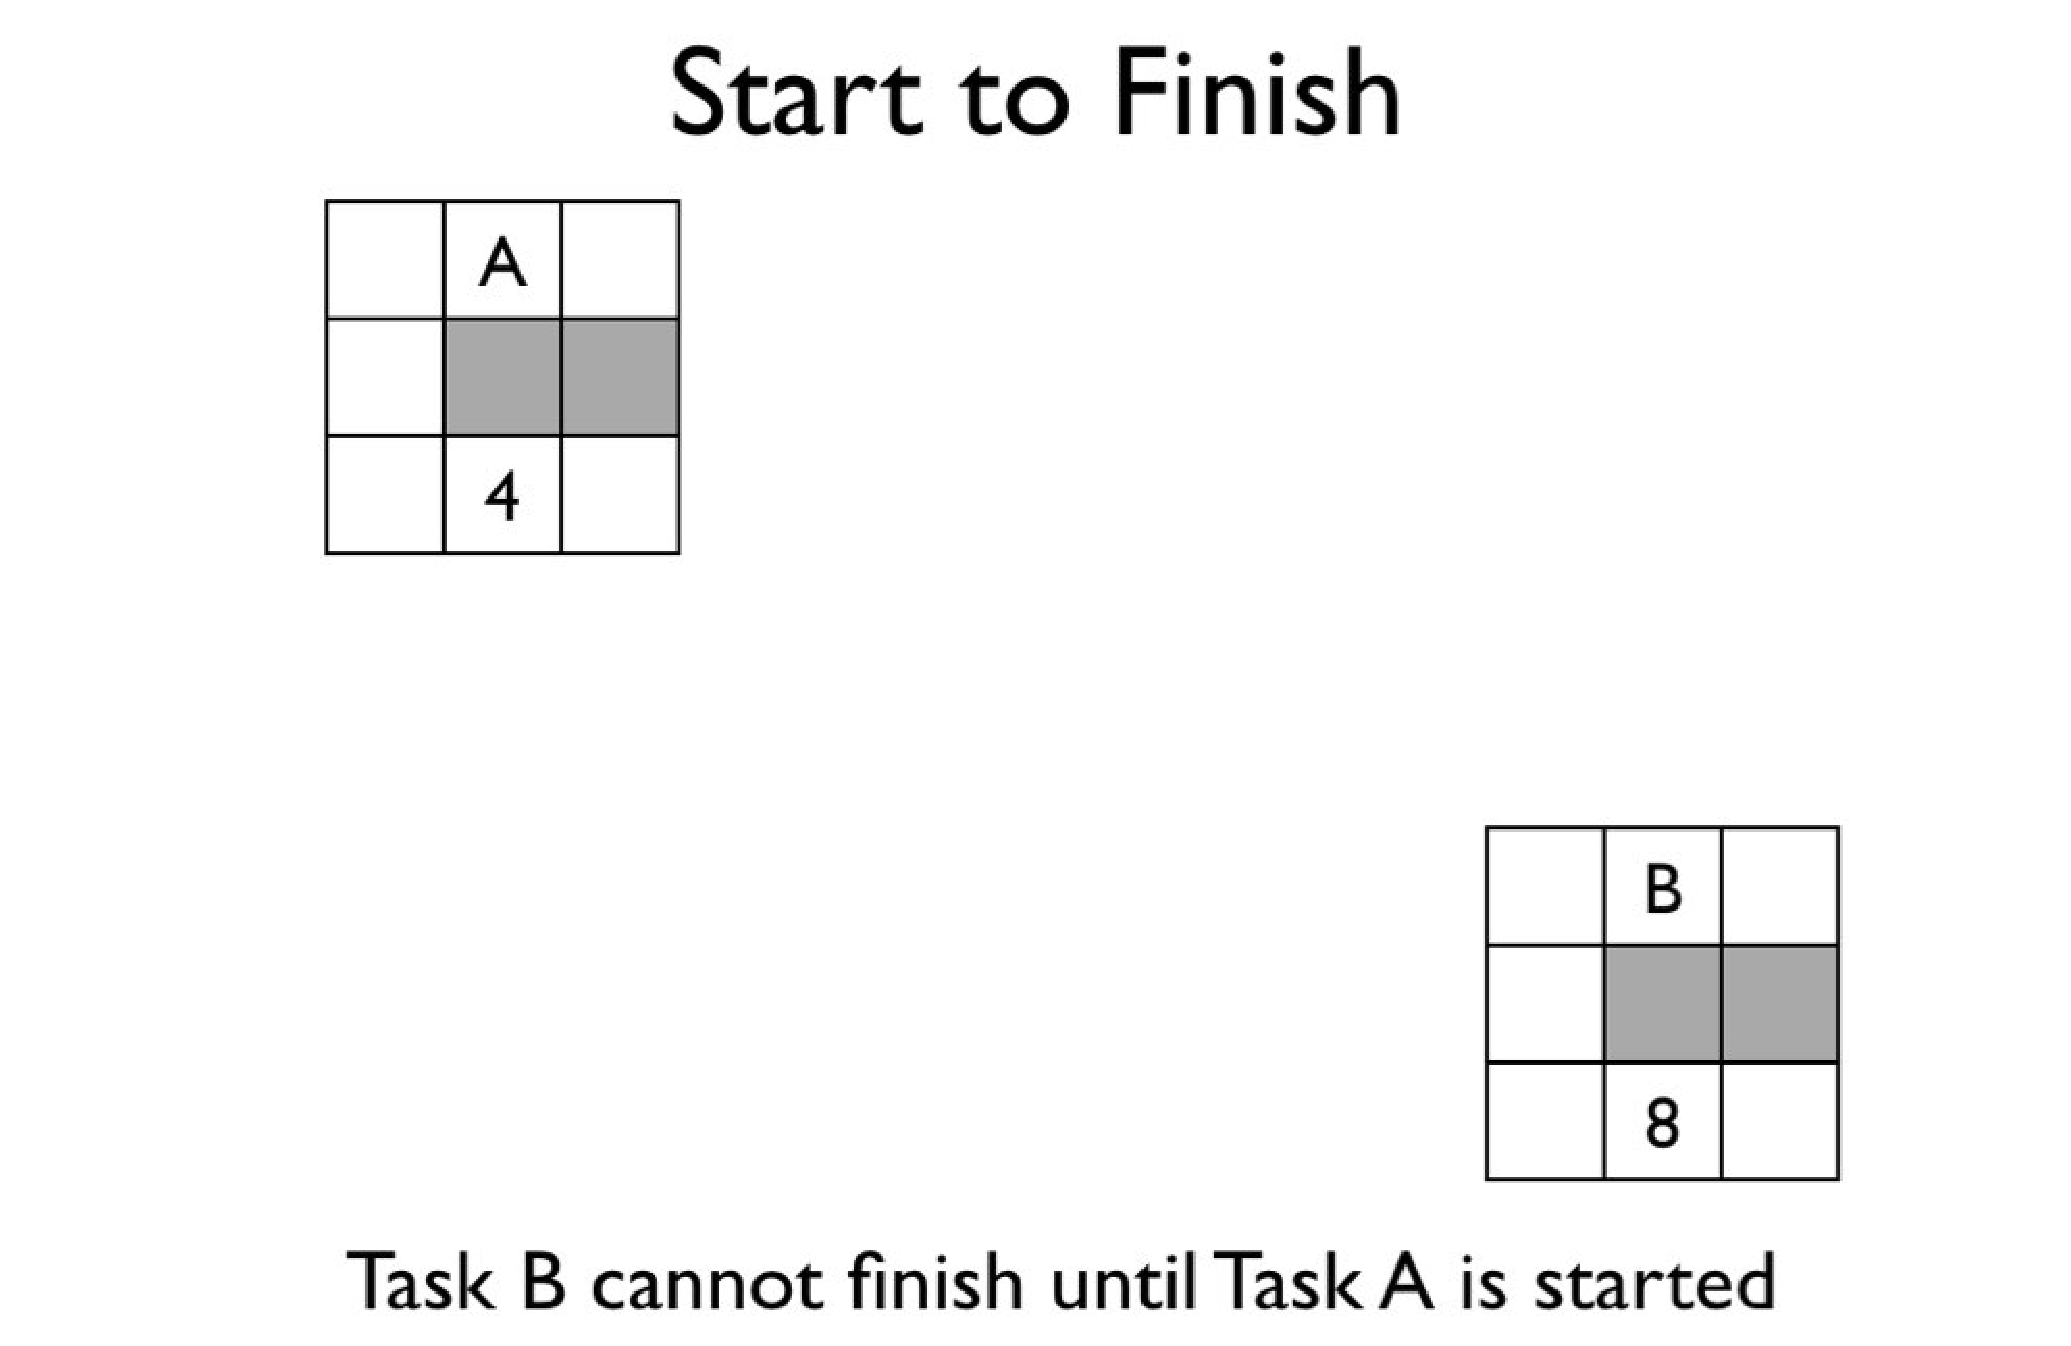 Diagram of a Start to Finish task relationship.